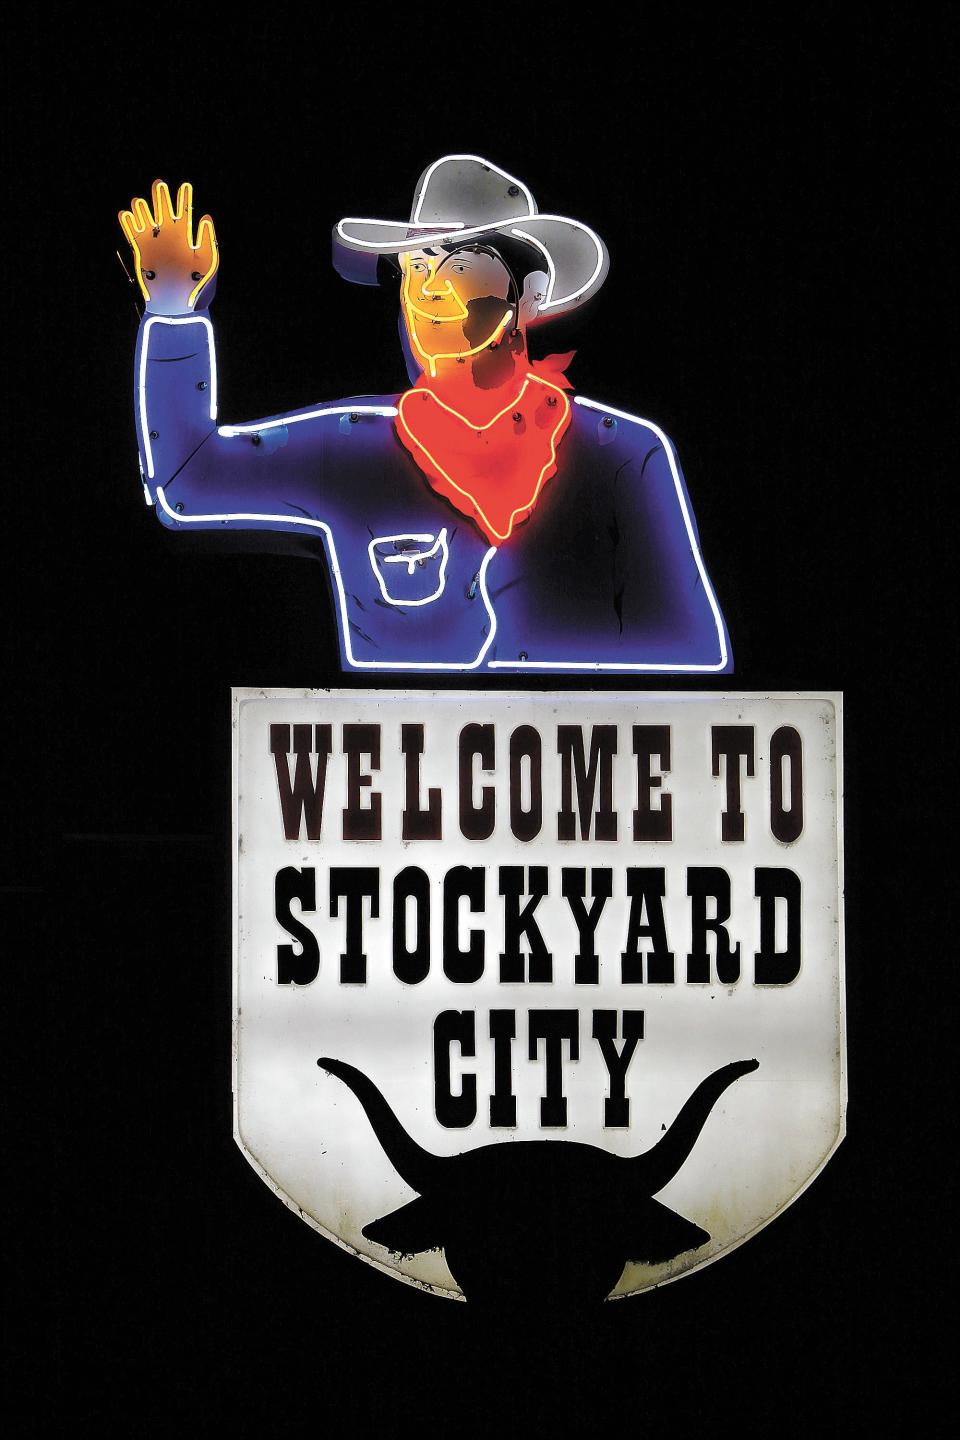 A look at the vintage Stockyard City sign.